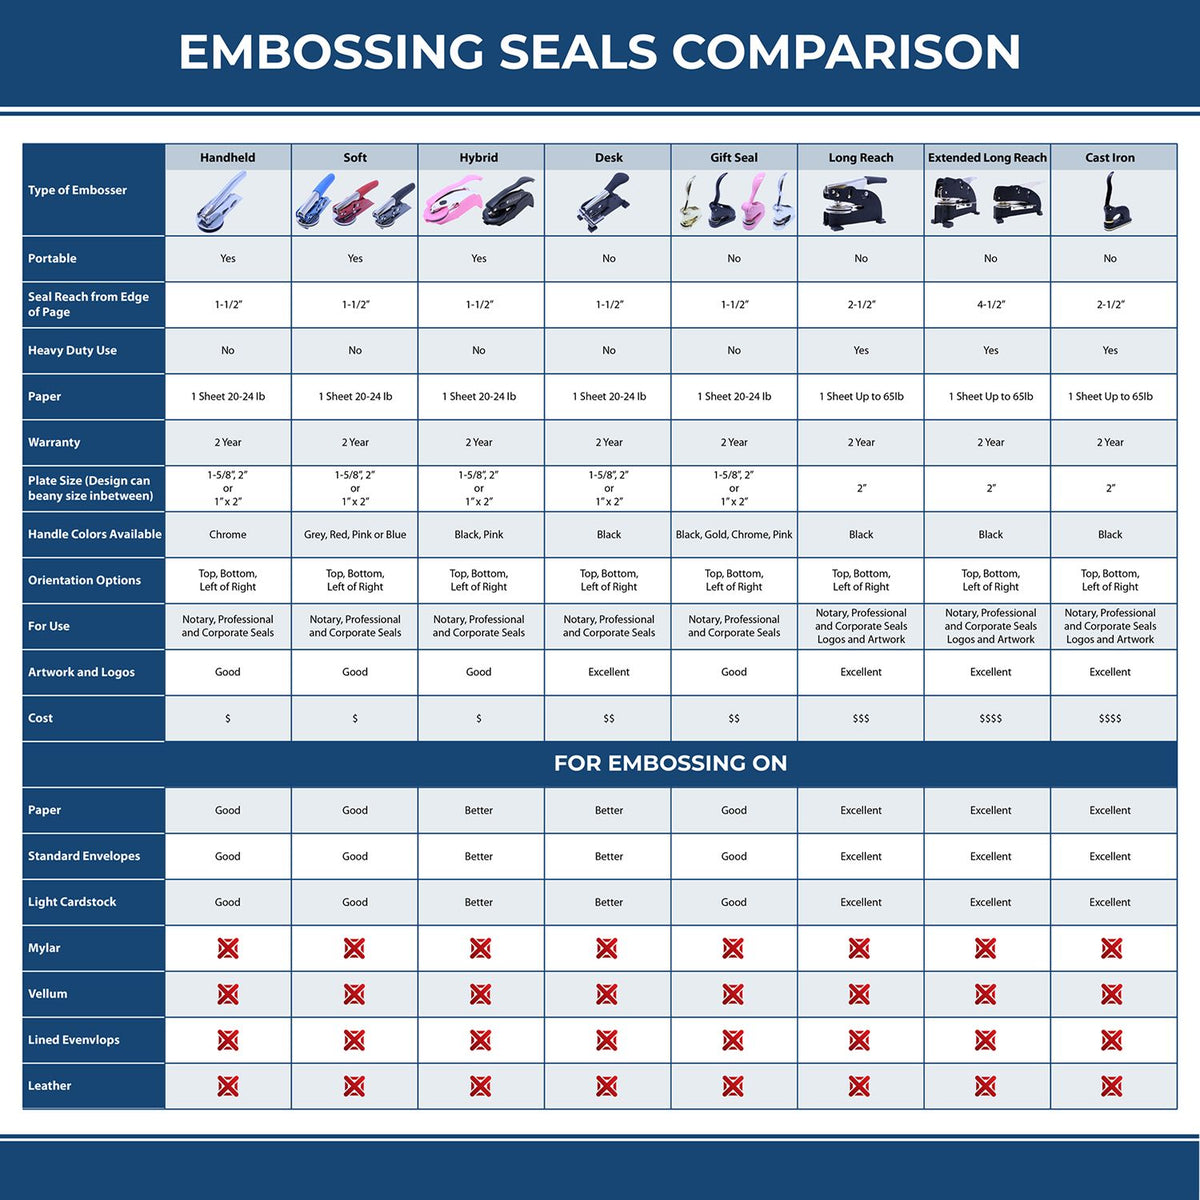 A comparison chart for the different types of mount models available for the Alaska Desk Surveyor Seal Embosser.